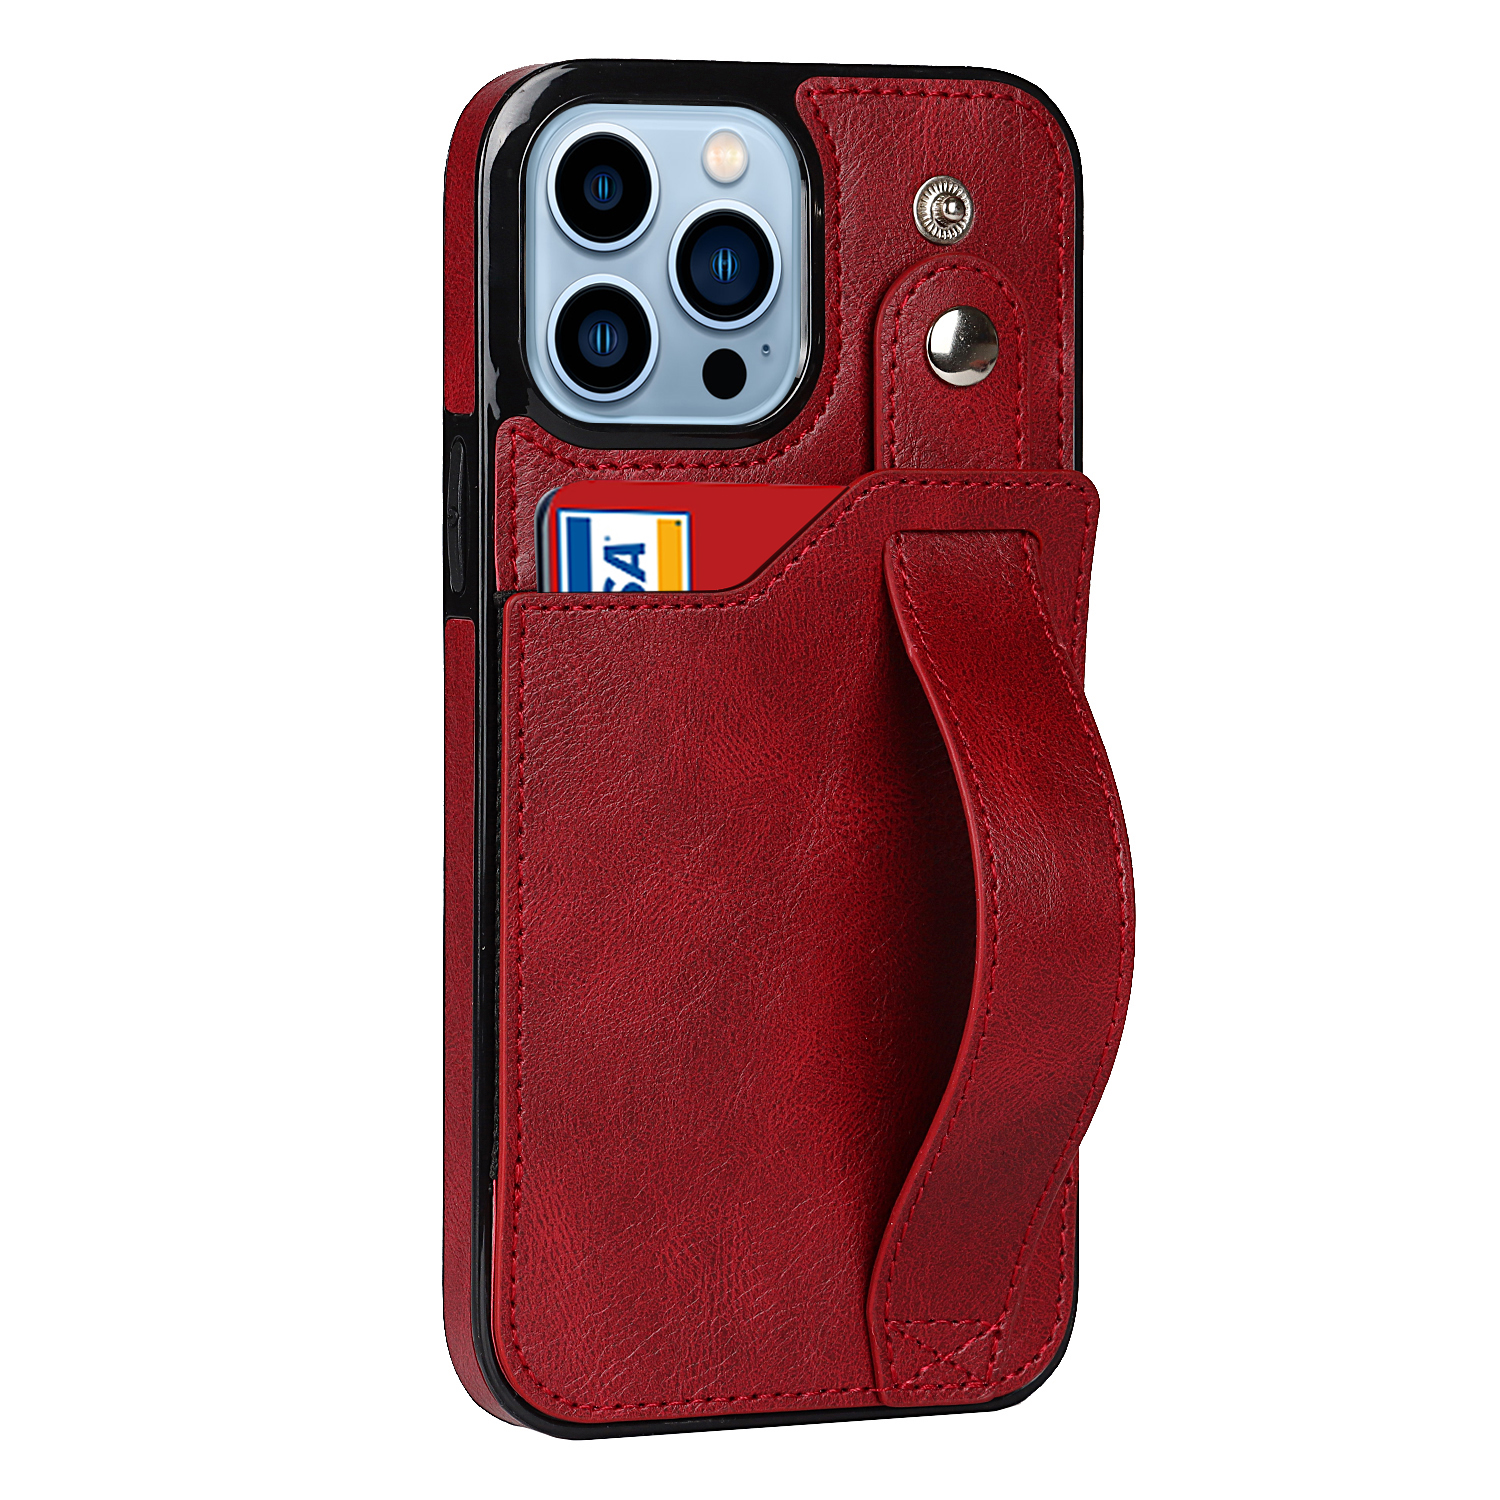 Samsung Galaxy S20 Plus Back Cover Hoesje met Handvat - leer- Handvat - Backcover - Samsung Galaxy S20 Plus - Rood